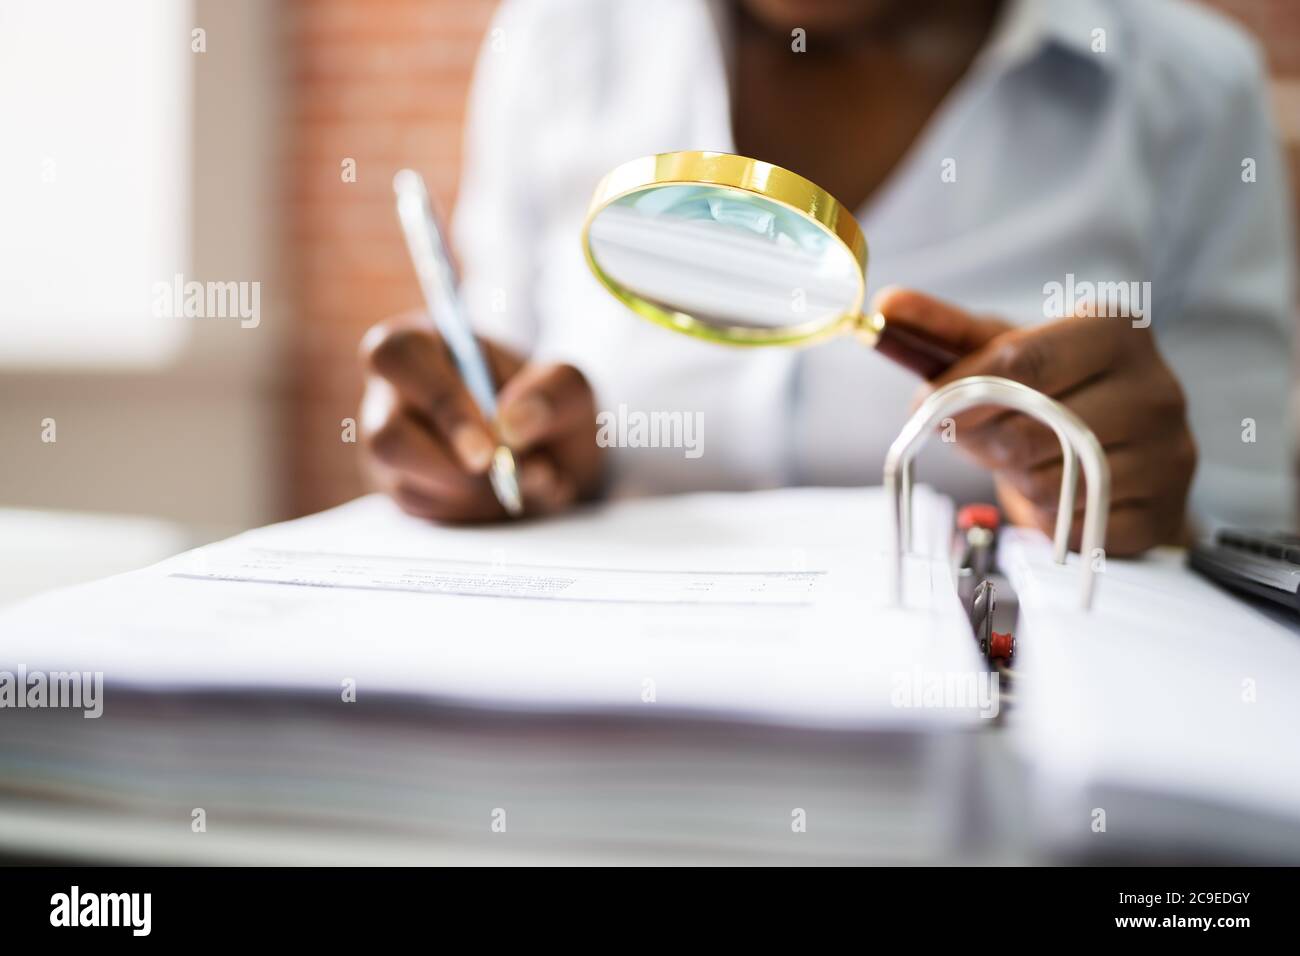 Auditor Investigating Business Fraud Using Magnifying Glass In Office Stock Photo